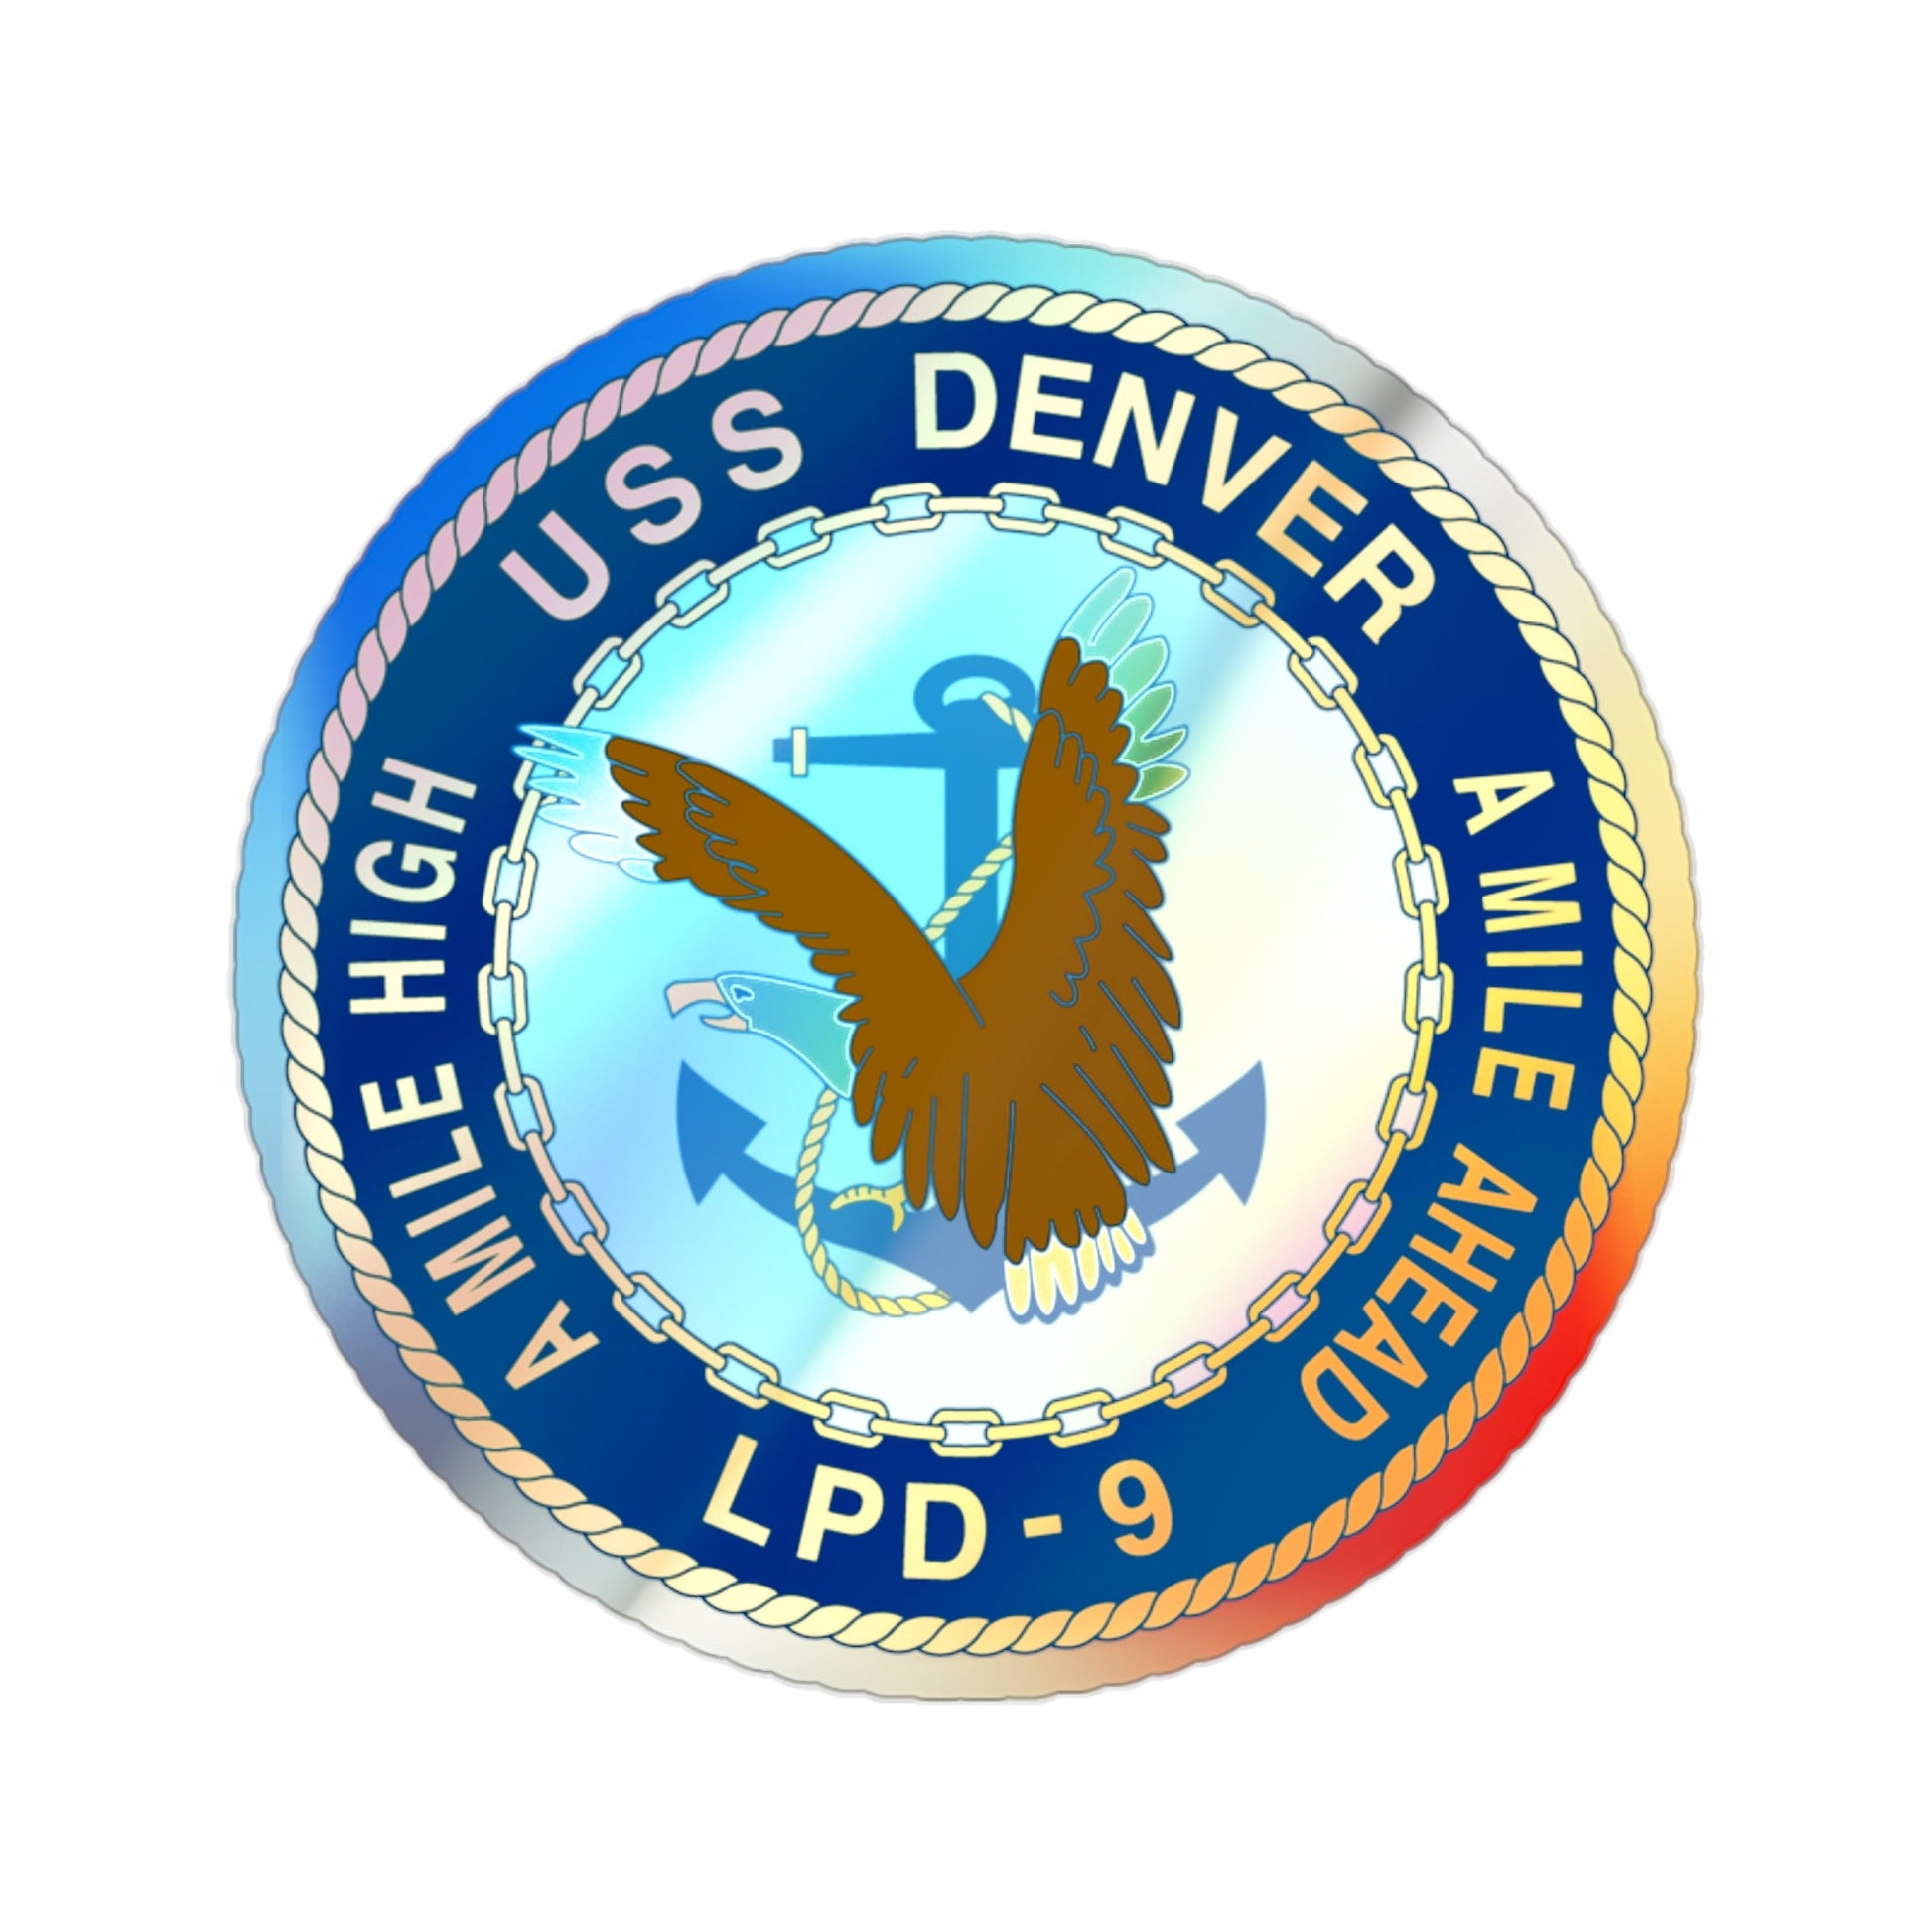 A Mile High USS Denver A Mile Ahead LPD 9 (U.S. Navy) Holographic STICKER Die-Cut Vinyl Decal-2 Inch-The Sticker Space